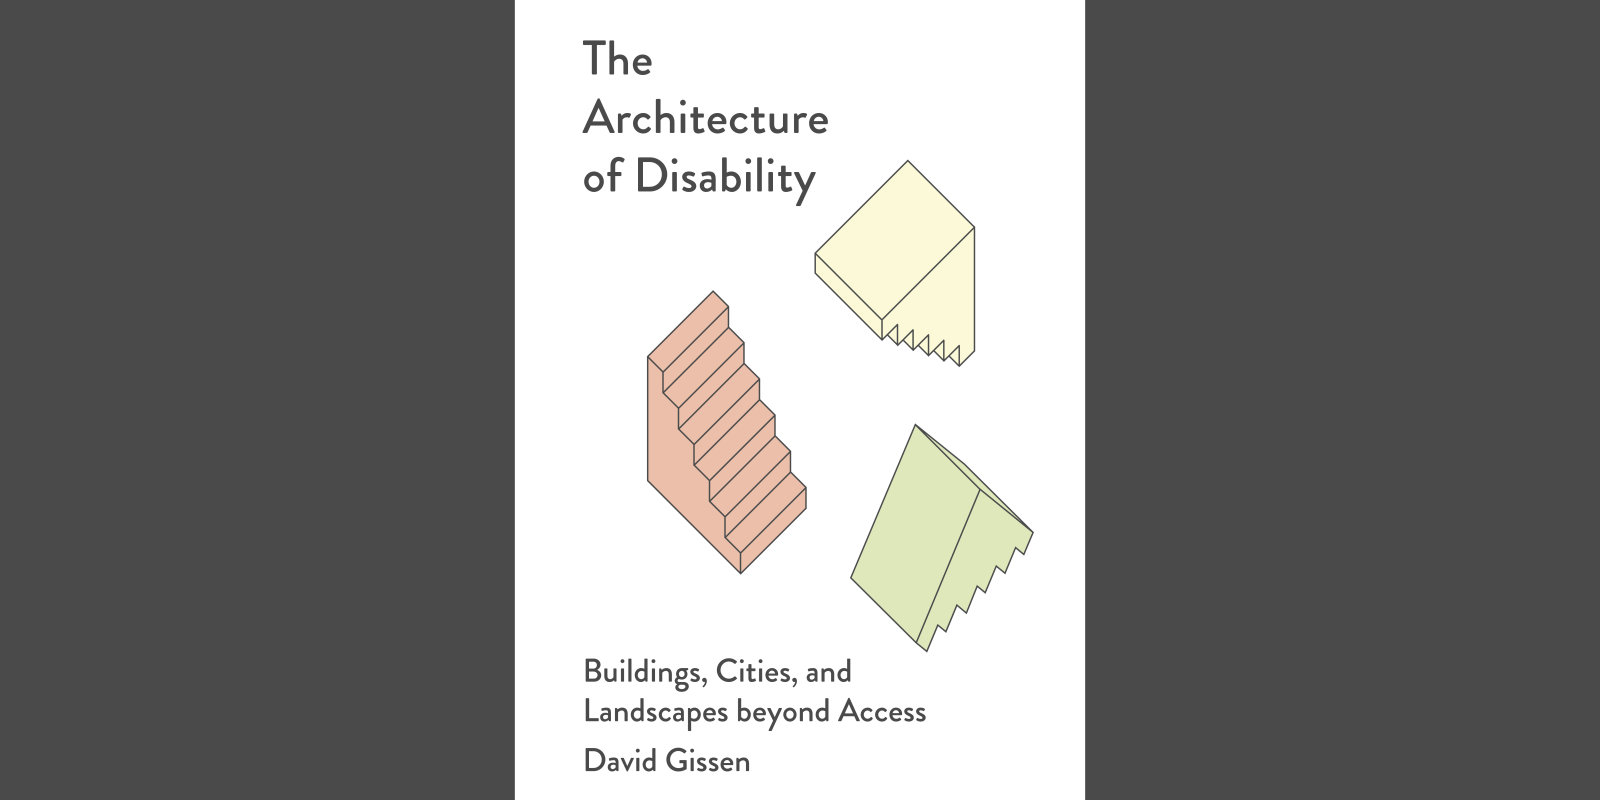 The Architecture of Disability book cover by author David Gissen. Minimalist illustrations of stairs colored in pink yellow and green.